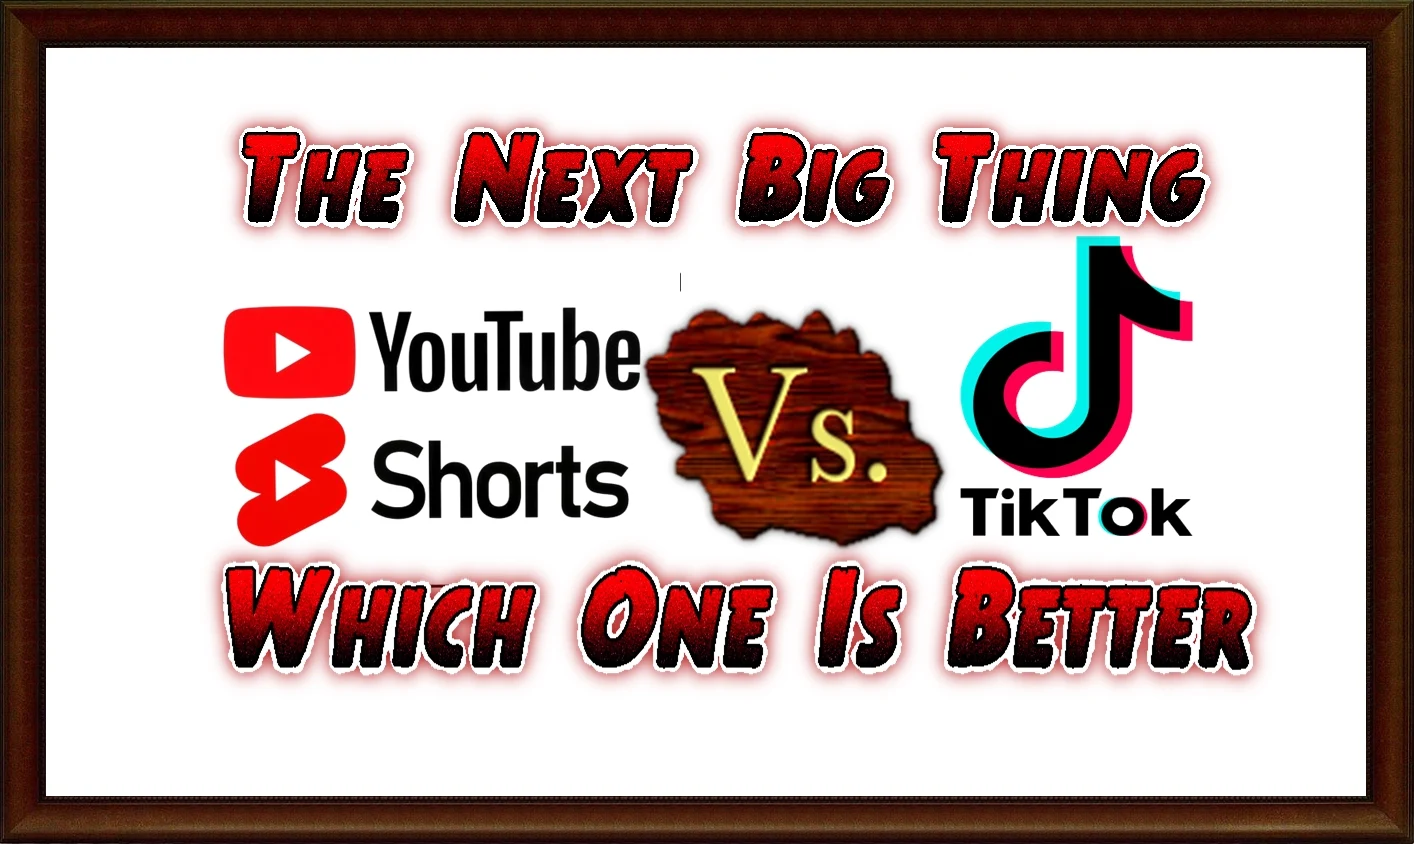 The Next Big Thing In YouTube Shorts Vs. TikTok: Which One Is Better?